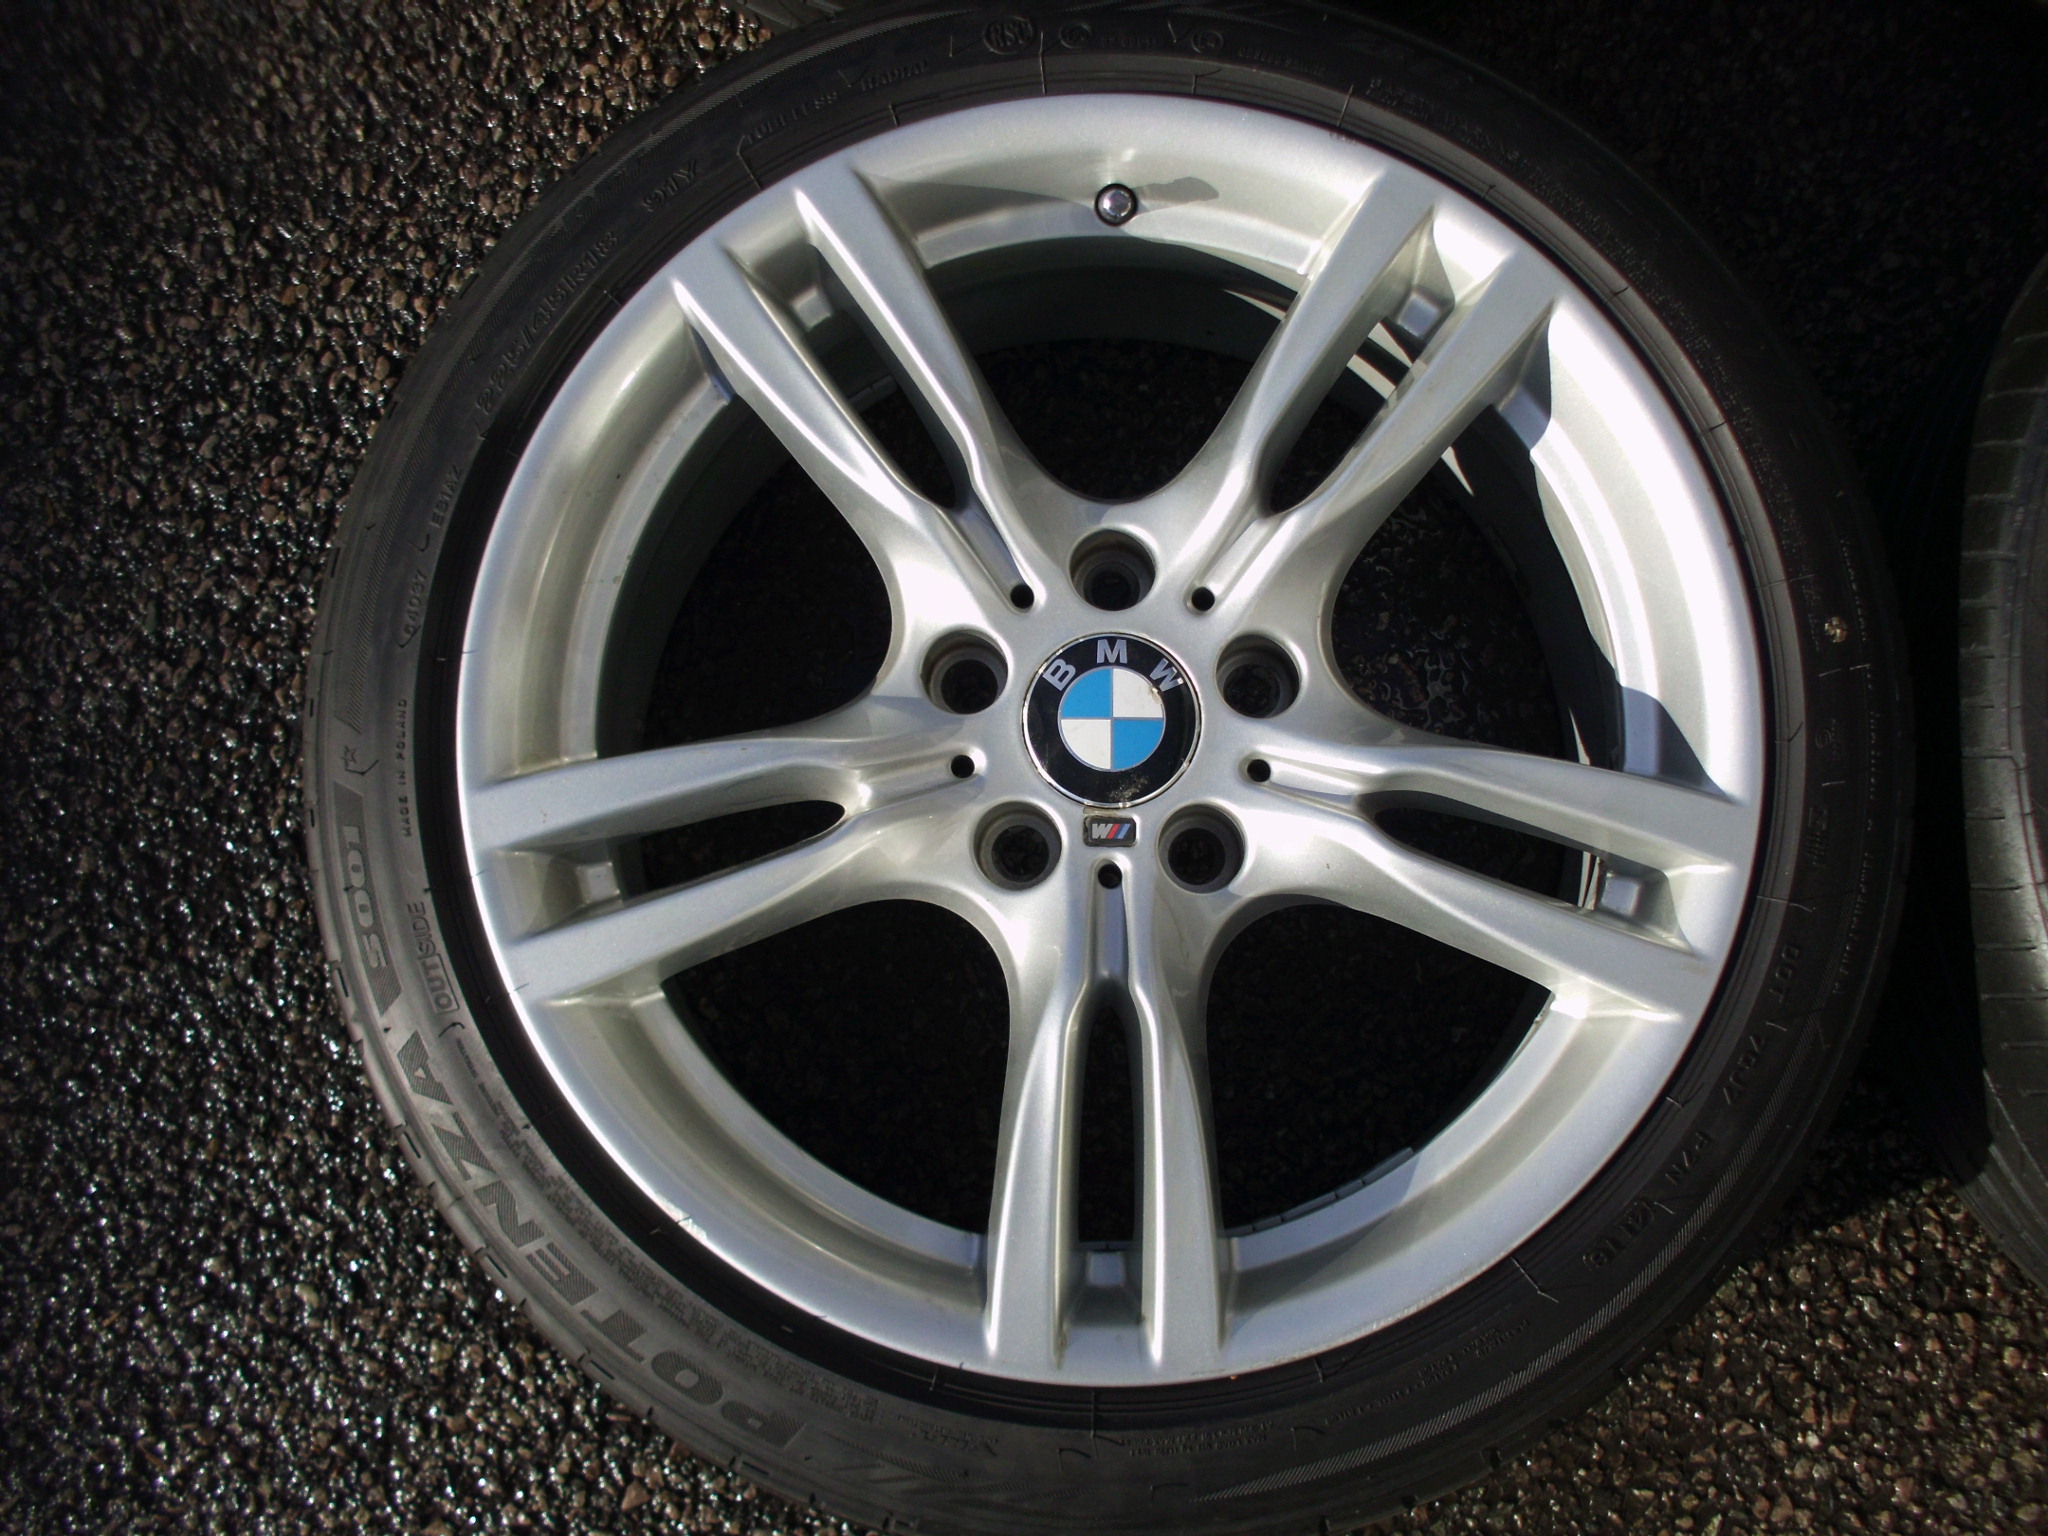 USED 18" GENUINE BMW STYLE 400 M SPORT ALLOY WHEELS, WIDER REARS, GC, INC RUNFLAT TYRES